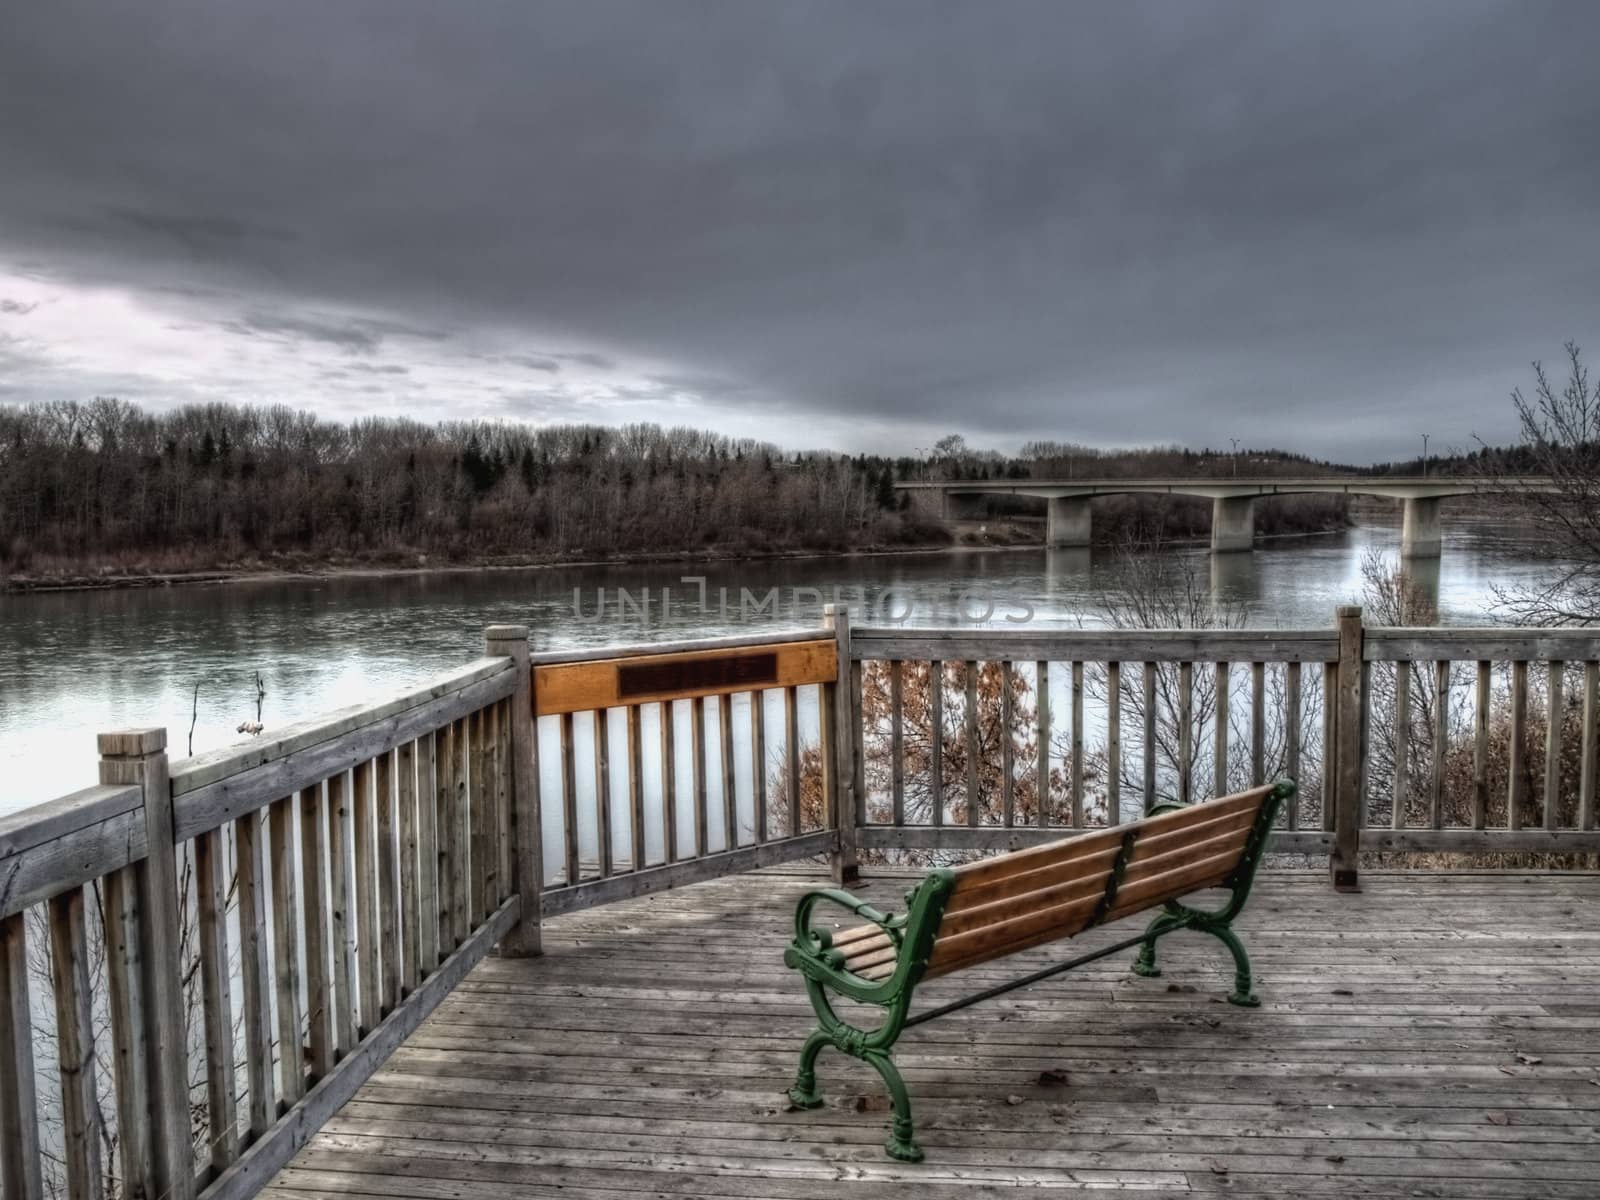 Lookout point and bench along a river in early November.